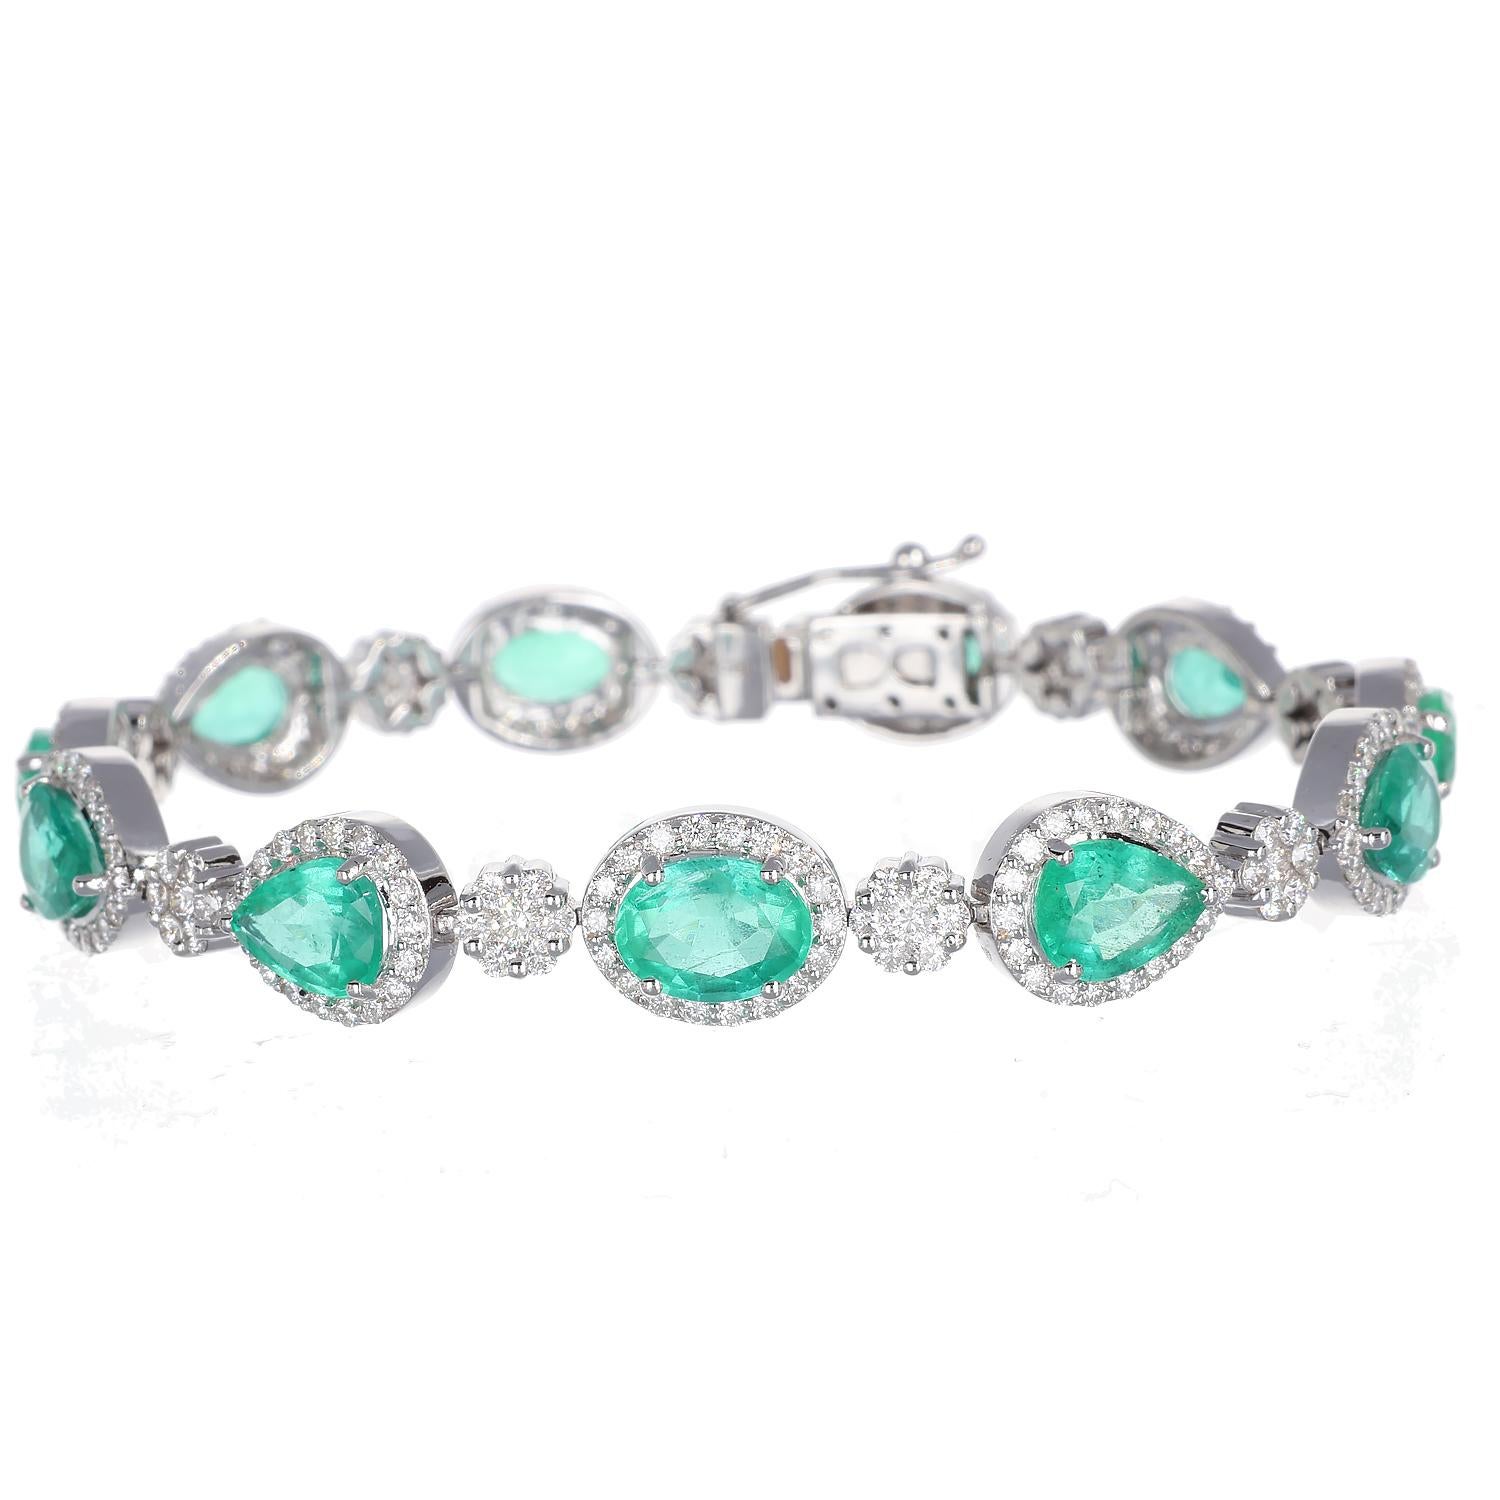 Pear Cut 8.95 ct Emeralds Pear - Oval 3.53 ct White Diamonds Bracelet 18kt White Gold For Sale